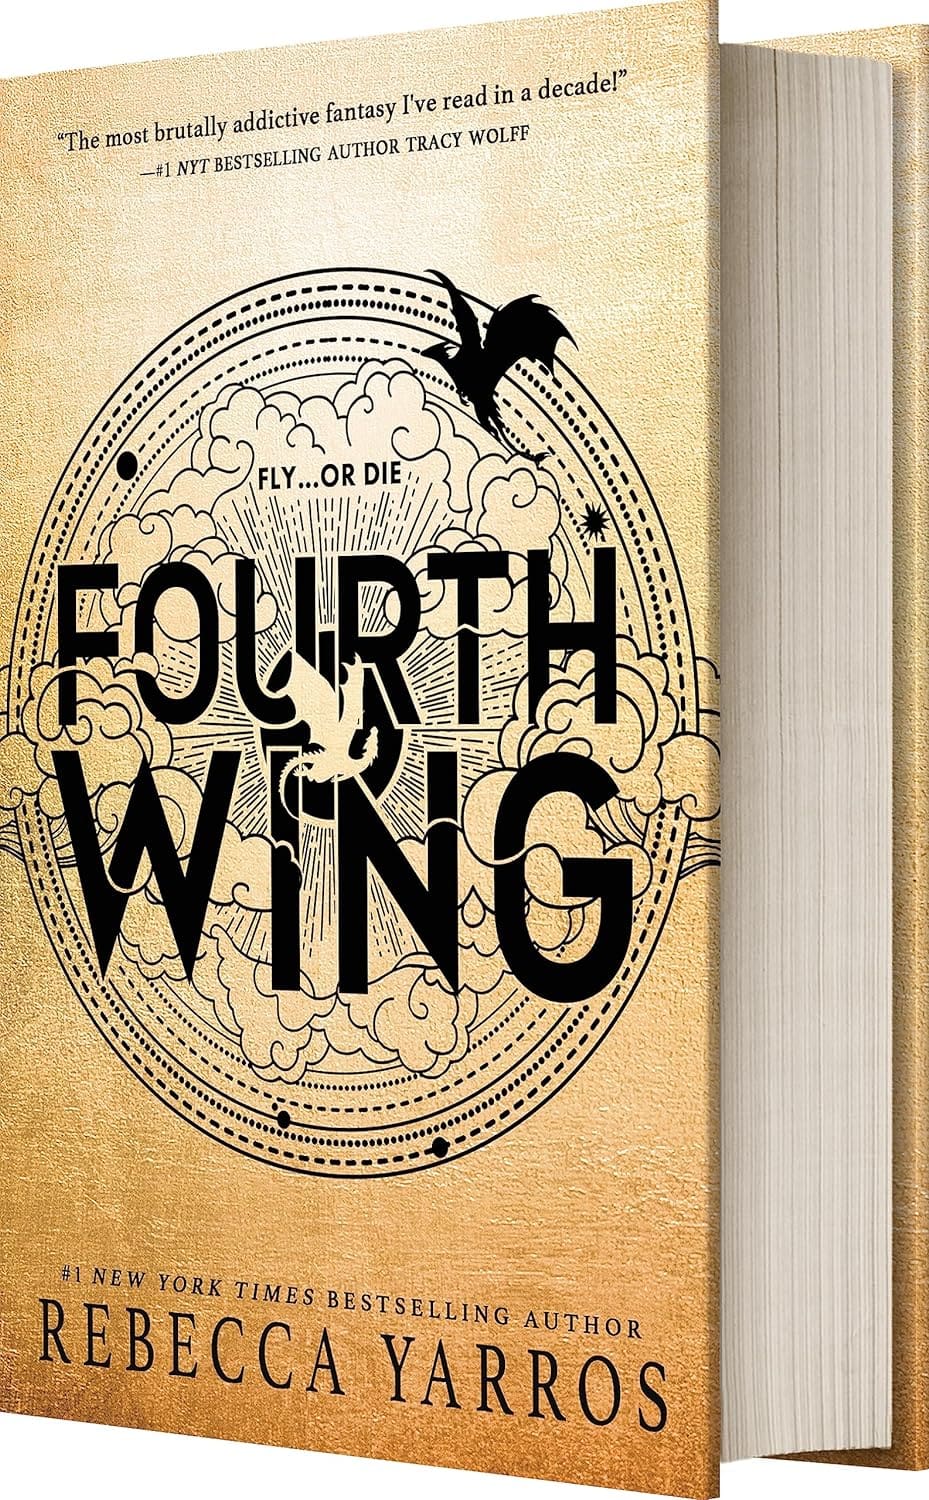 Fourth Wing Book By Rebecca Yarros